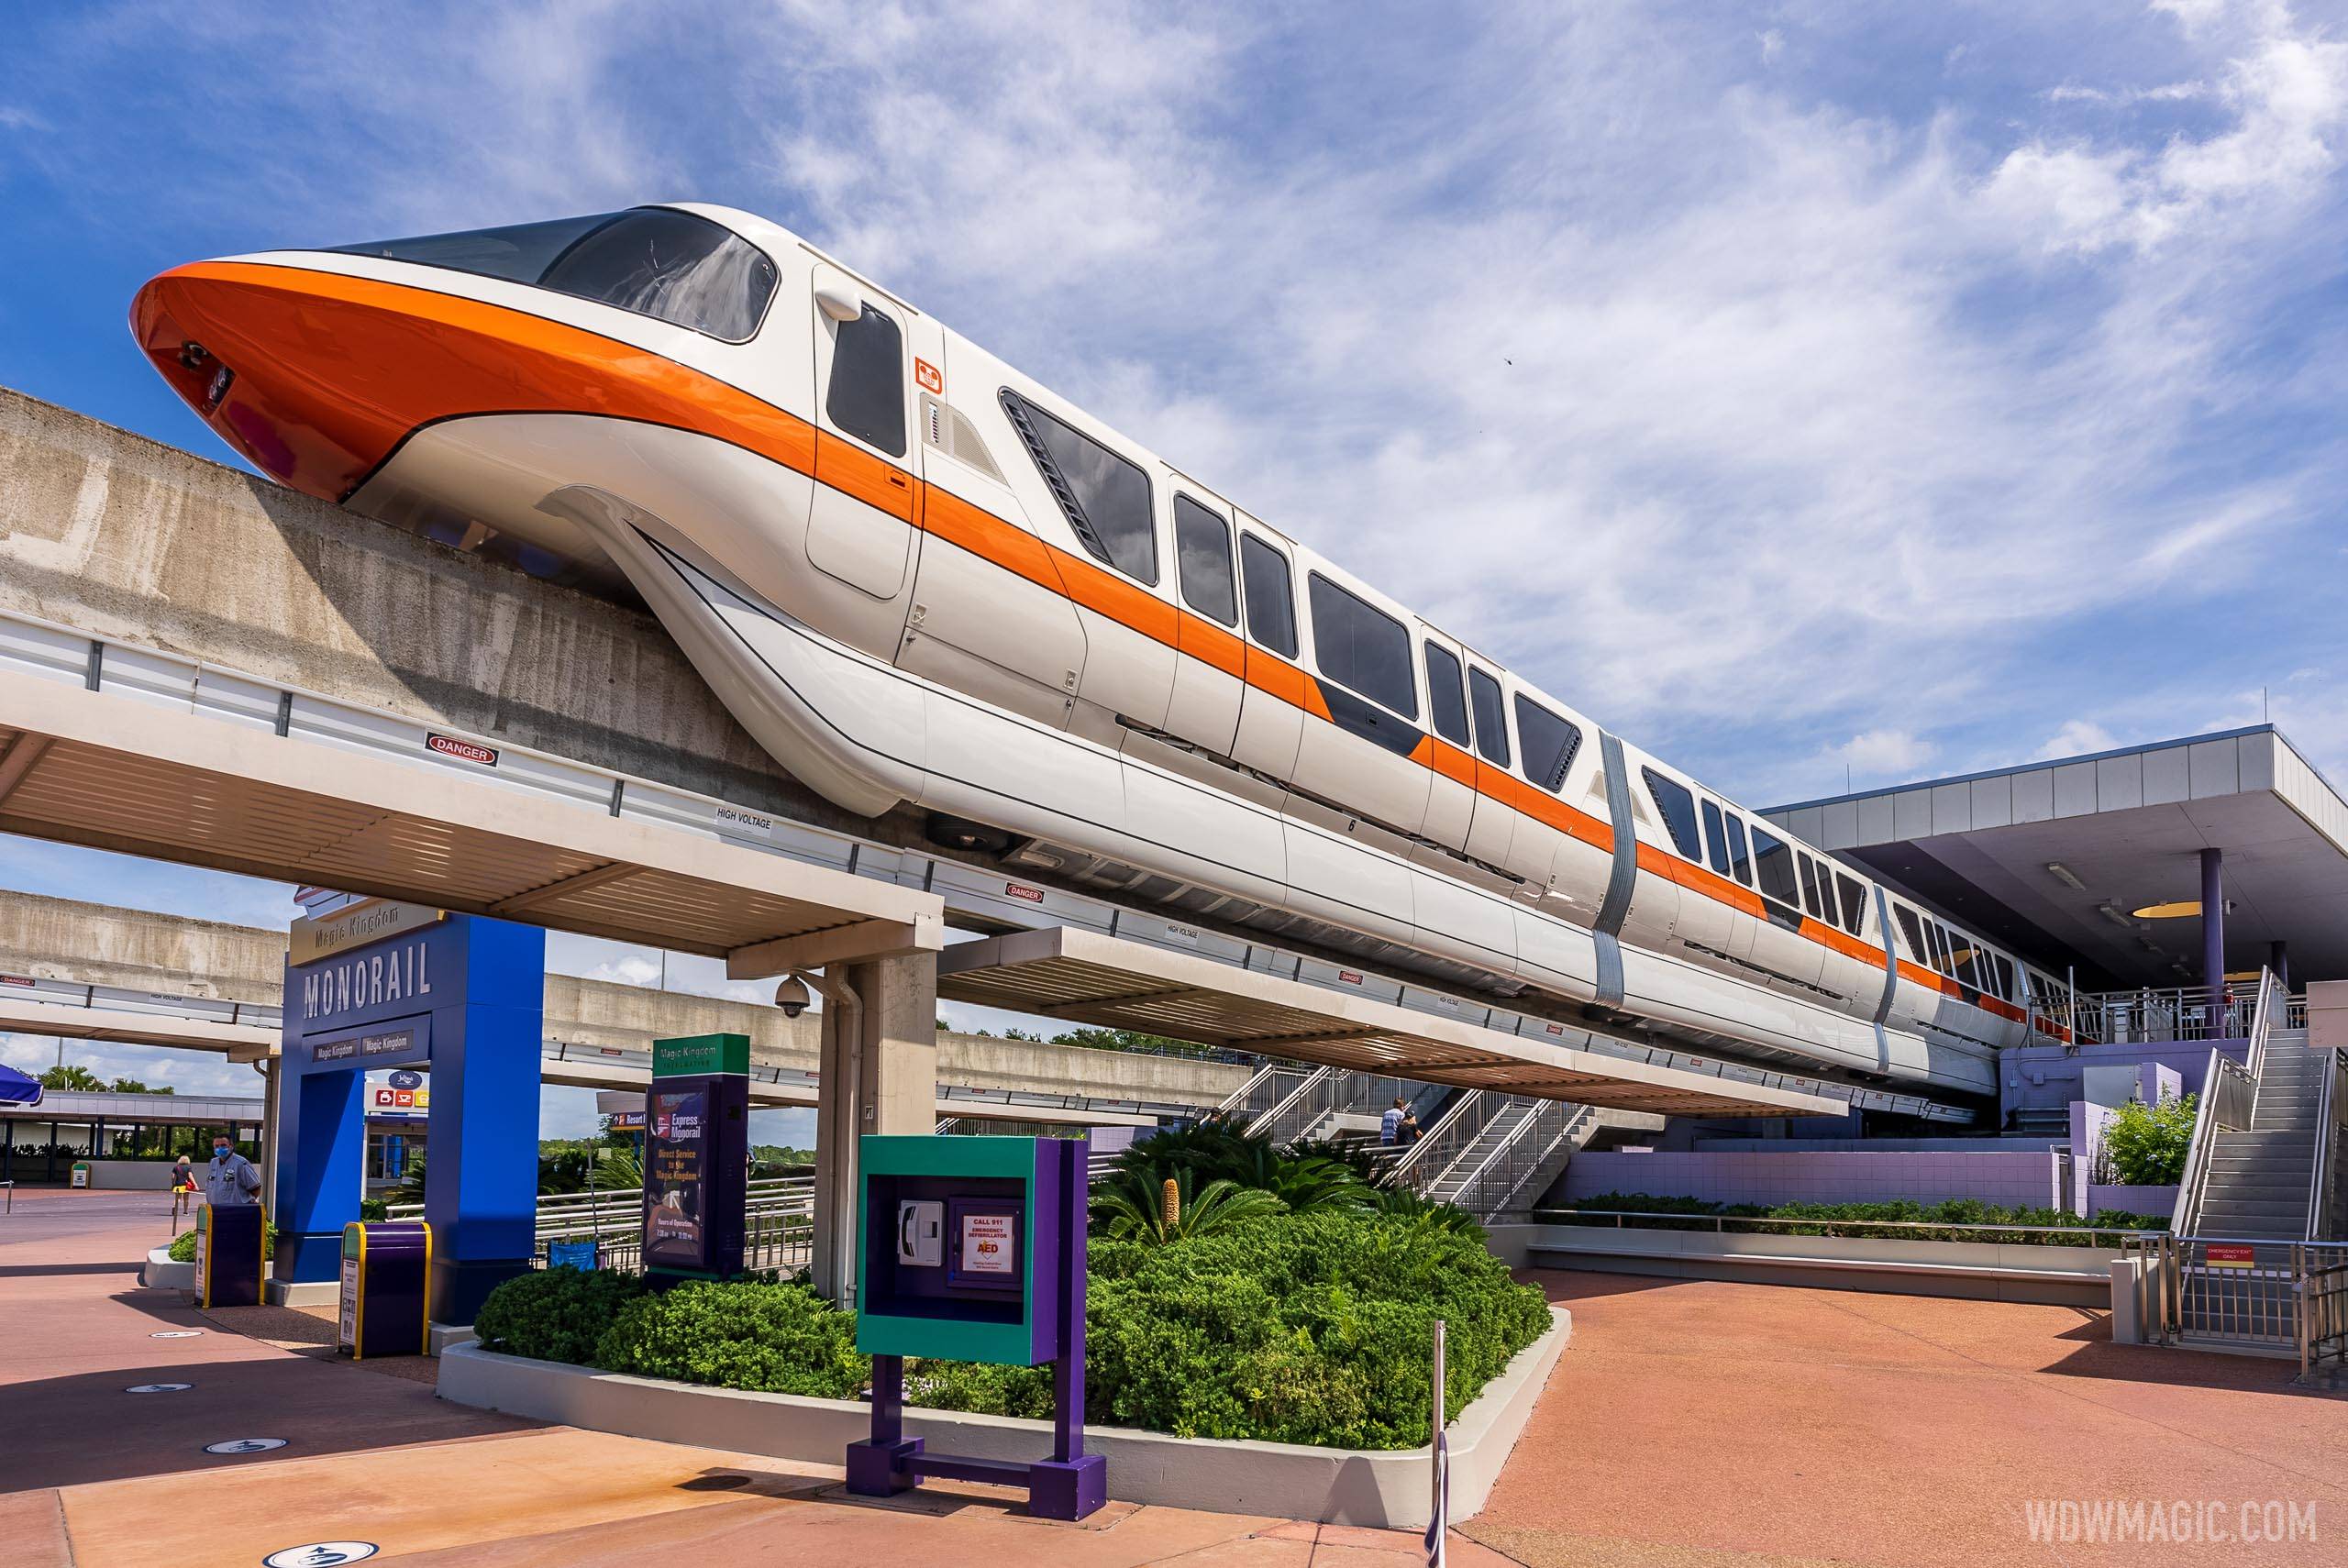 Disney World's monorail service was closed Friday afternoon following the accident